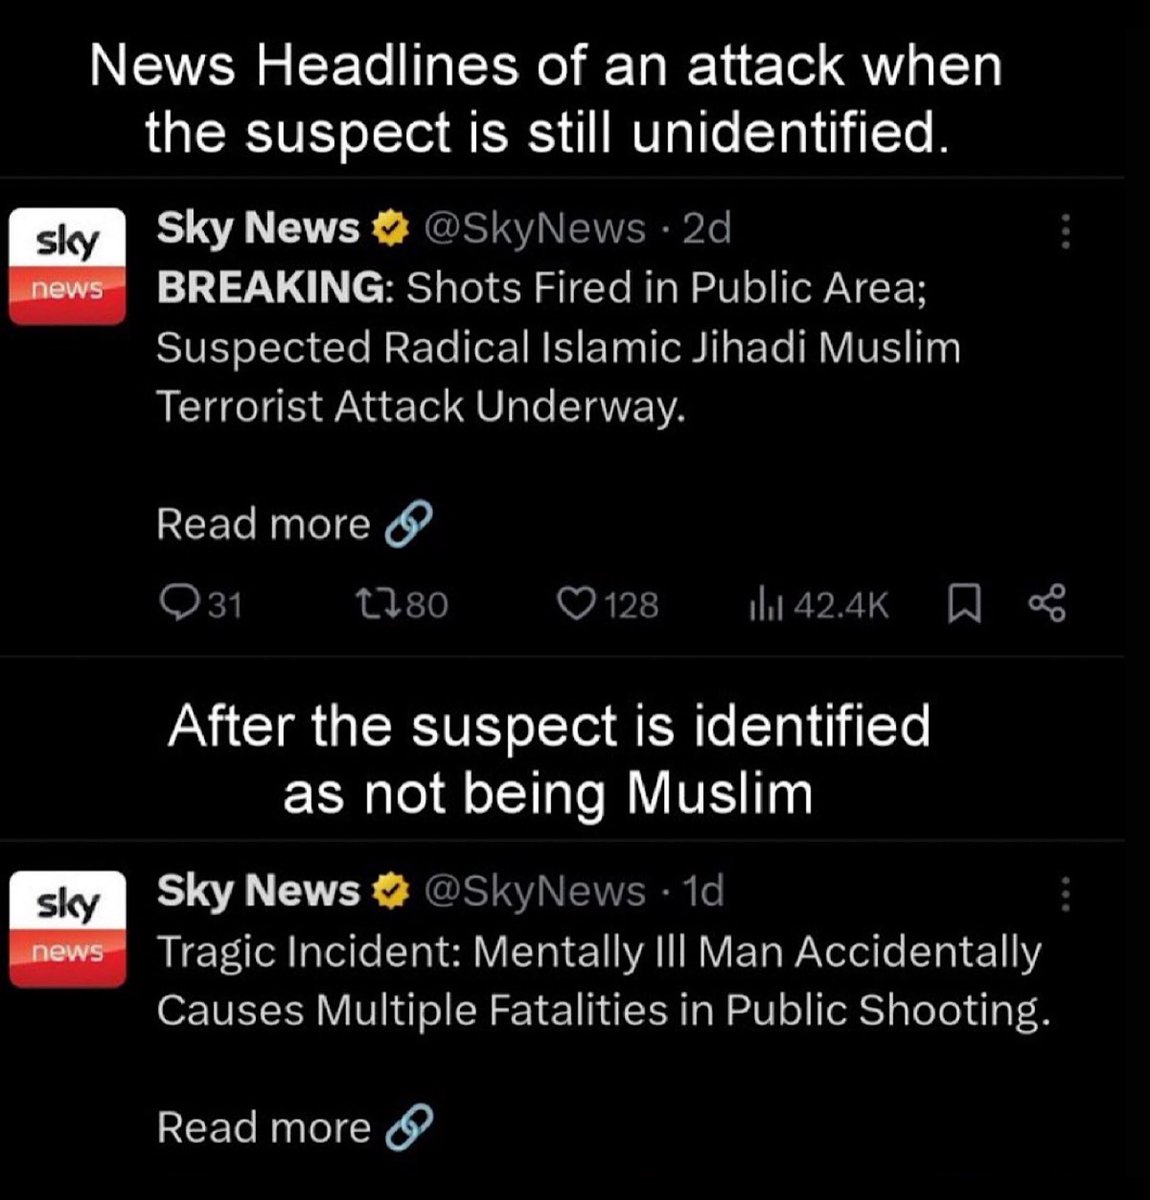 BREAKING: HEADLINE CHANGE BY SKY SHOWS EXTREME ATTACK ON MUSLIMS